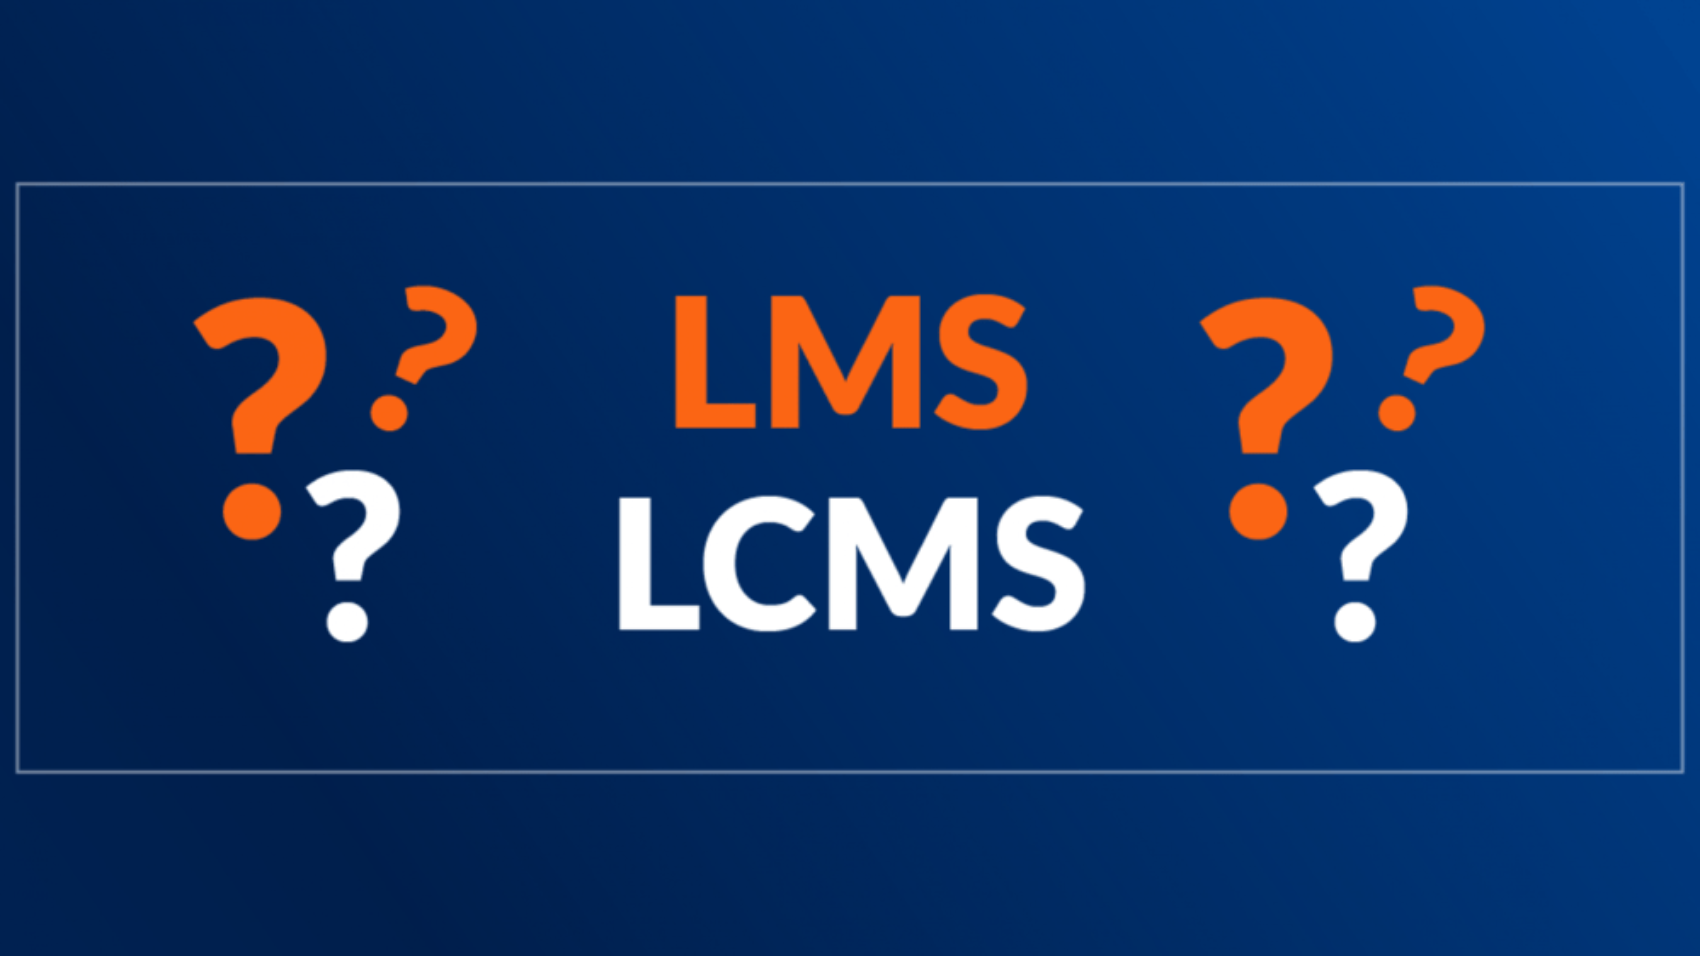 LMS-and-LCMS-differences-min-1700x956